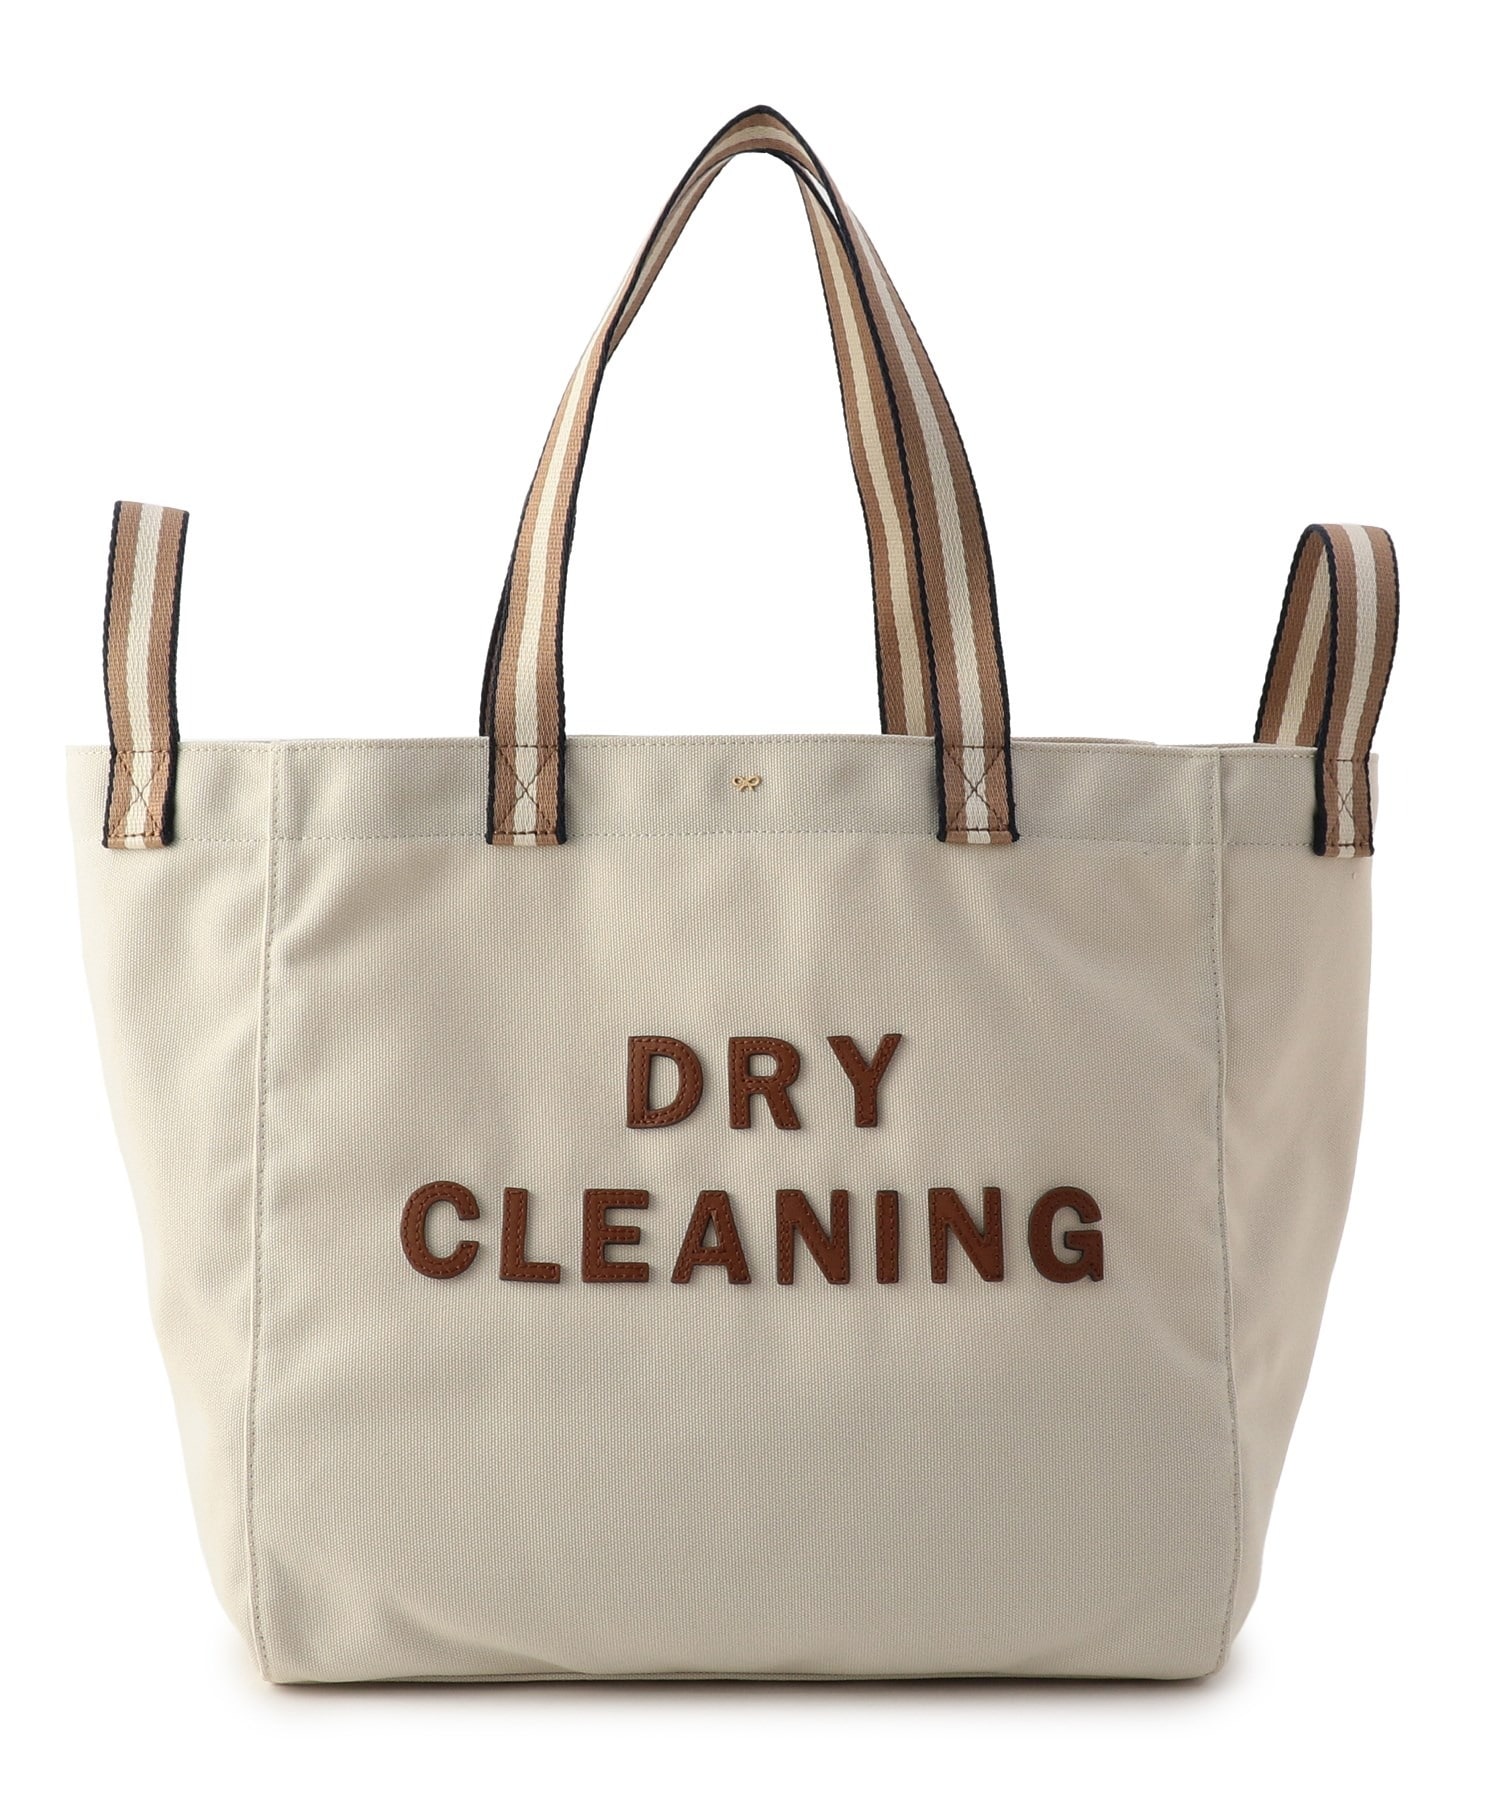 "Dry Cleaning Household Tote" トートバッグ 詳細画像 アイボリー 1